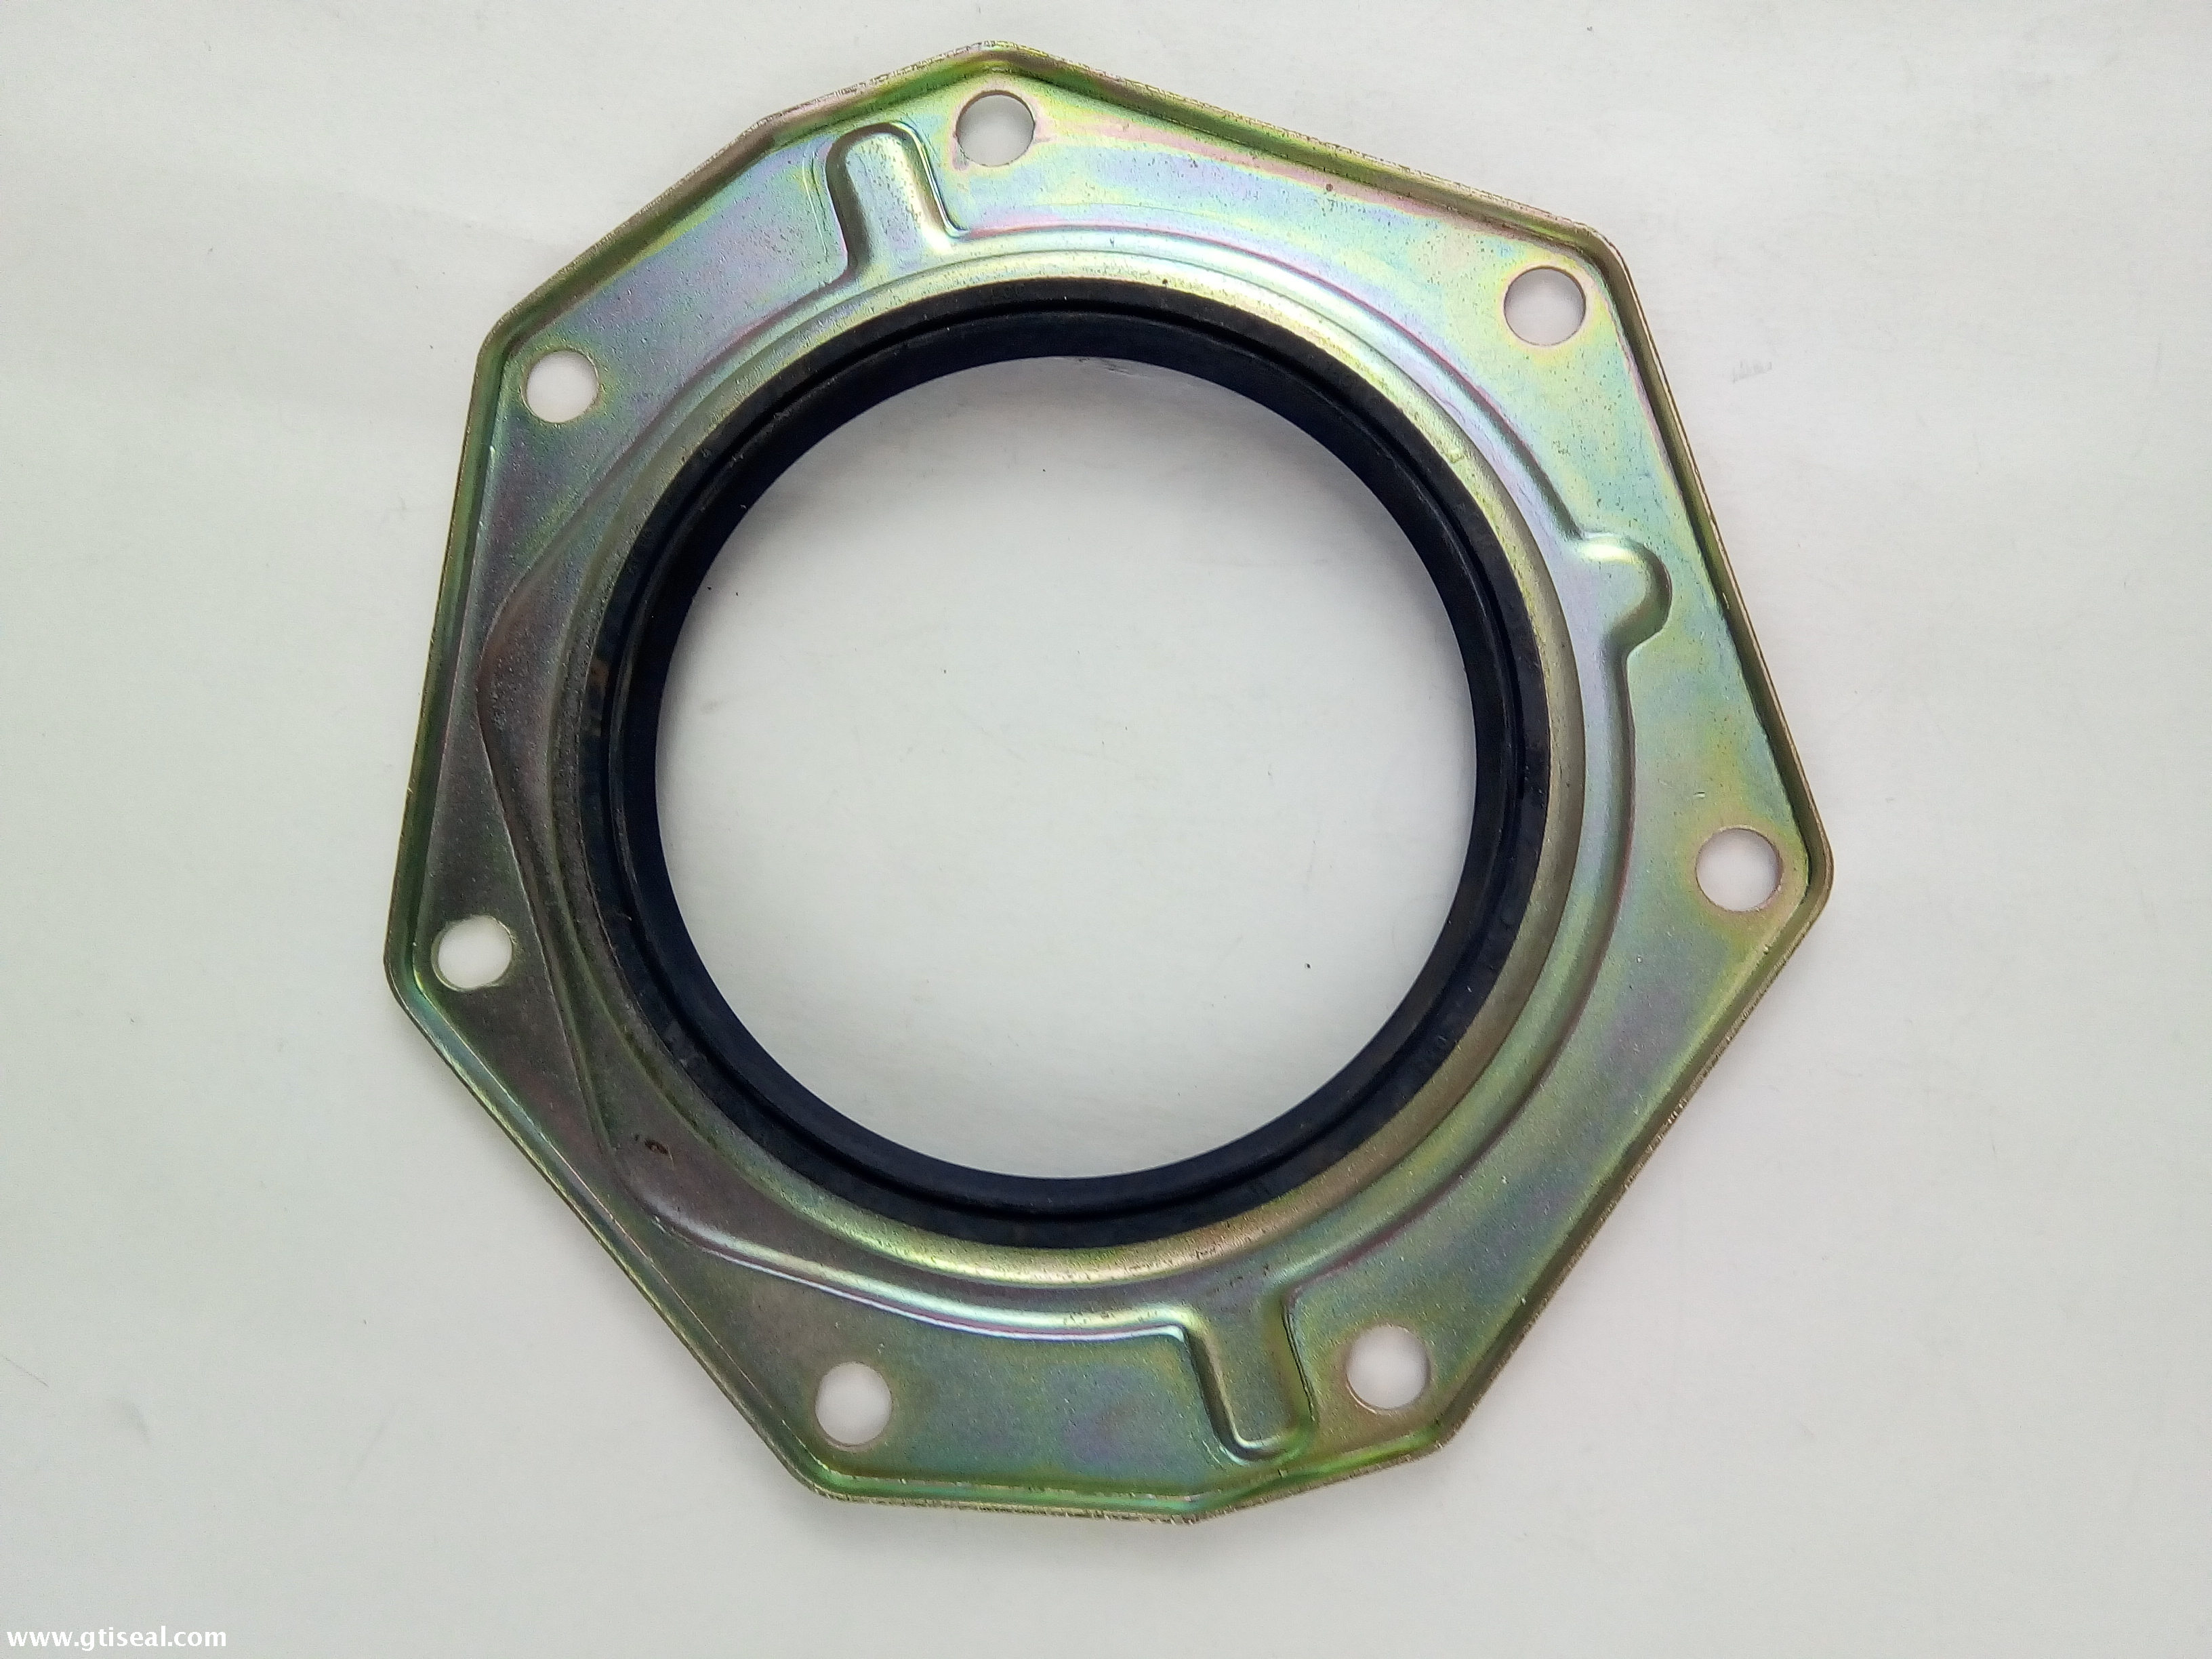 China factory high quality metal oil seals with best price 